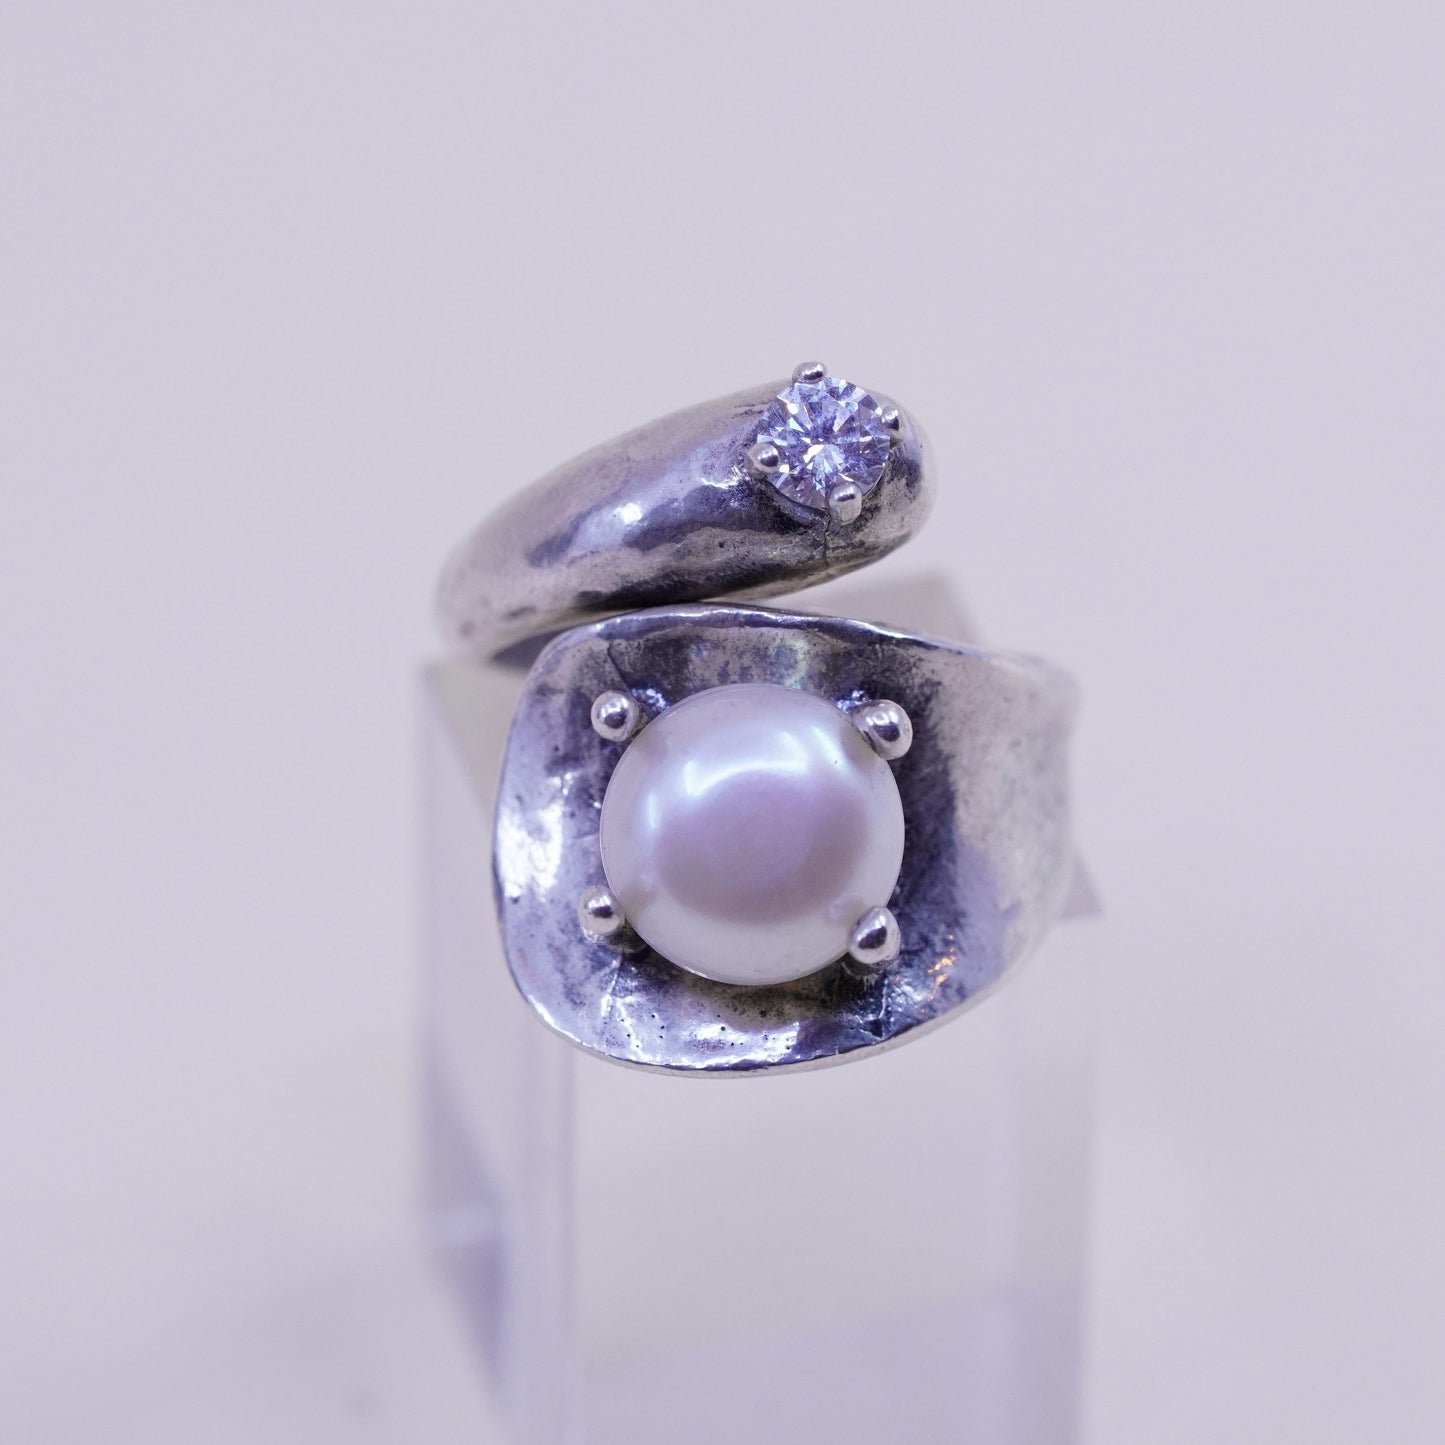 Size 7, vintage Sterling silver handmade ring, modern 925 band with pearl cz